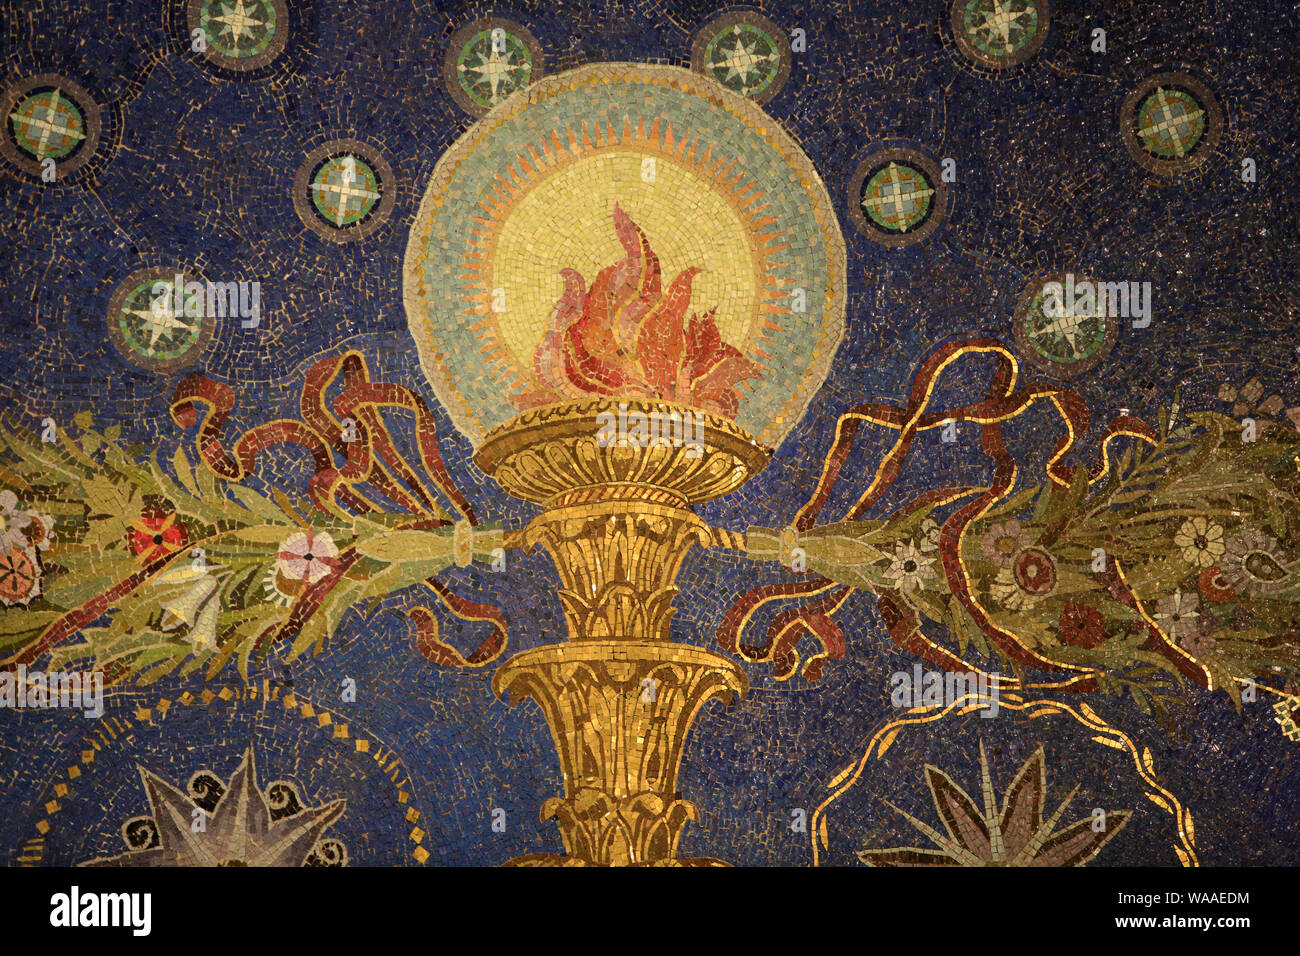 Flame. Detail from the Mosaic of the Basilica at Gethsemane. The Church of All Nations, also known as the Church or Basilica of the Agony. Jerusalem. Stock Photo